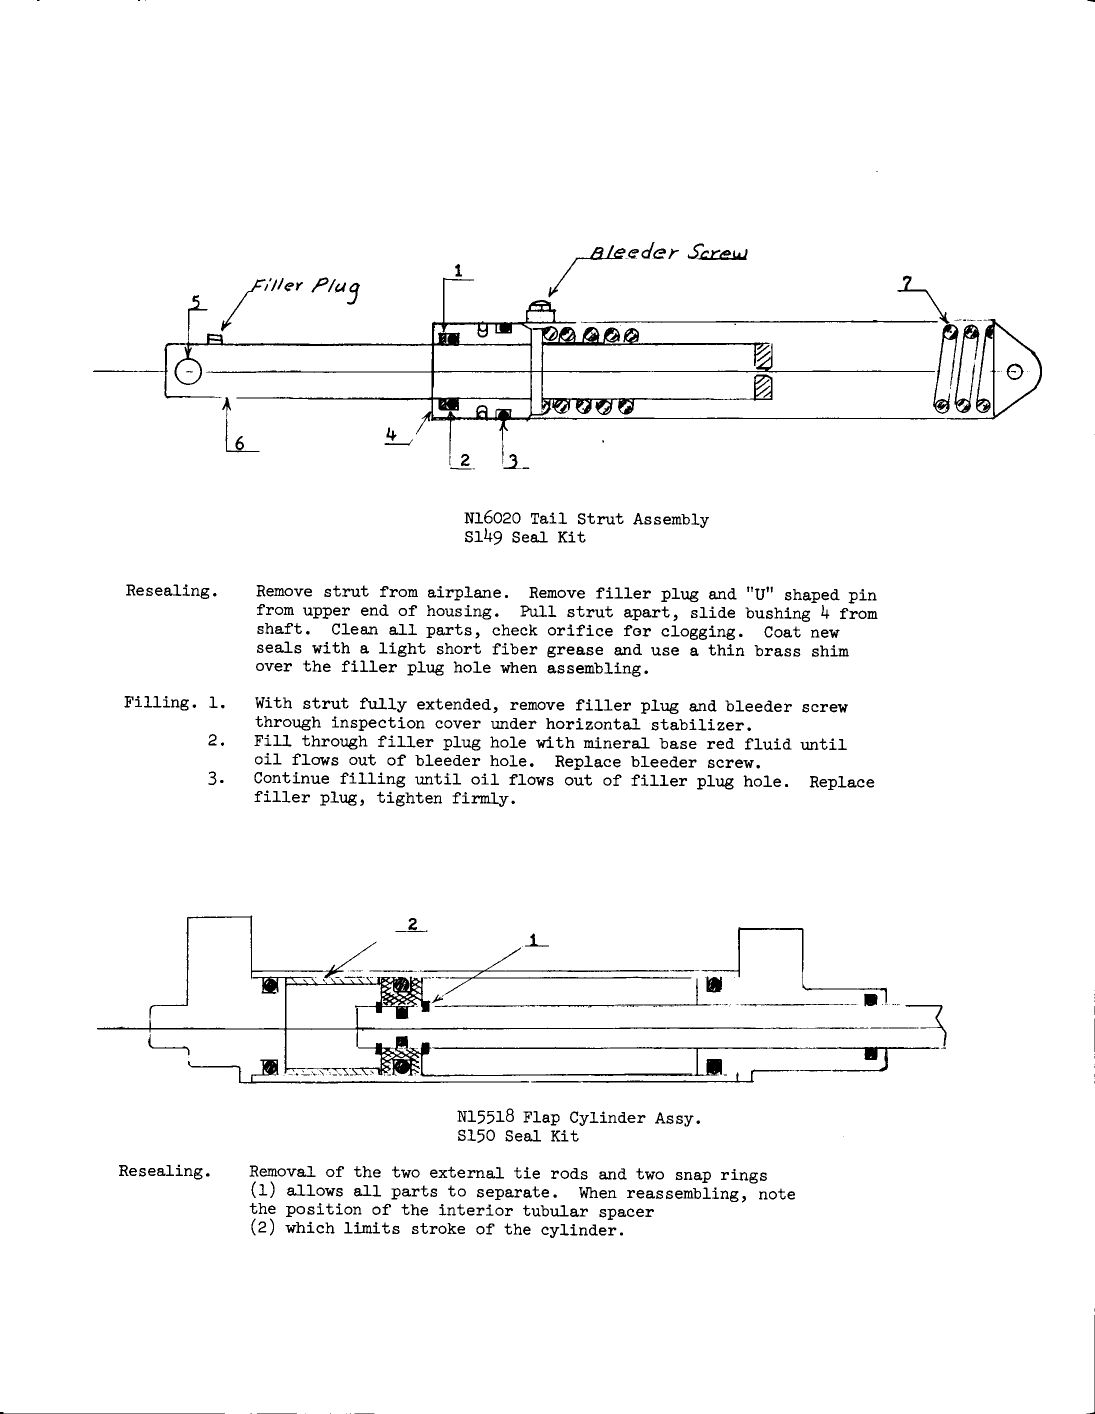 Sample page 4 from AirCorps Library document: The Swift Hydraulic Manual